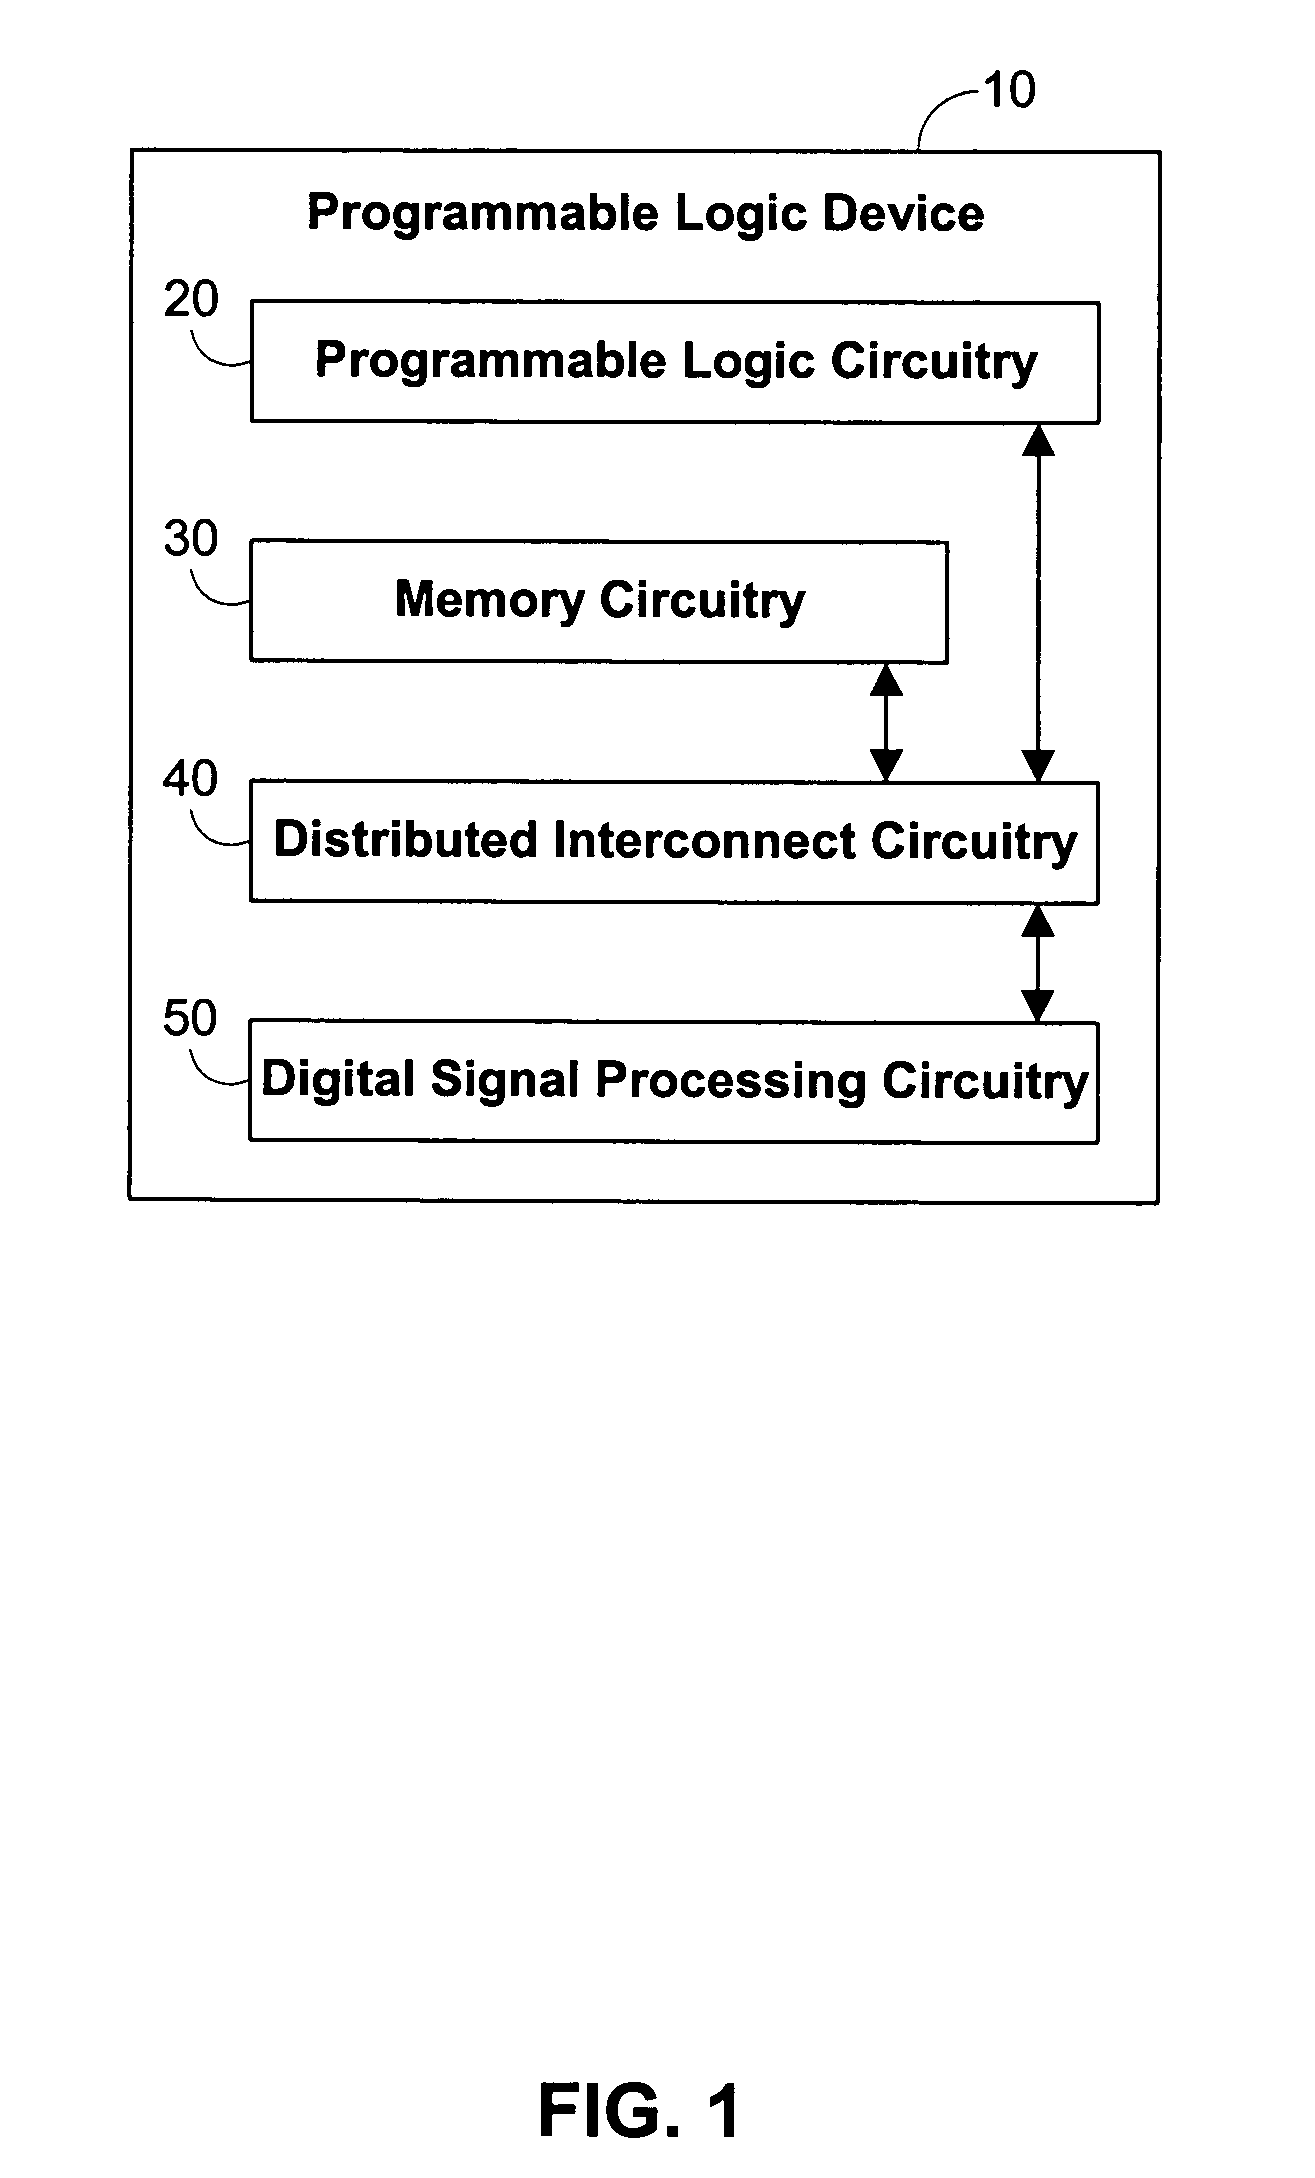 Hybrid multipliers implemented using DSP circuitry and programmable logic circuitry